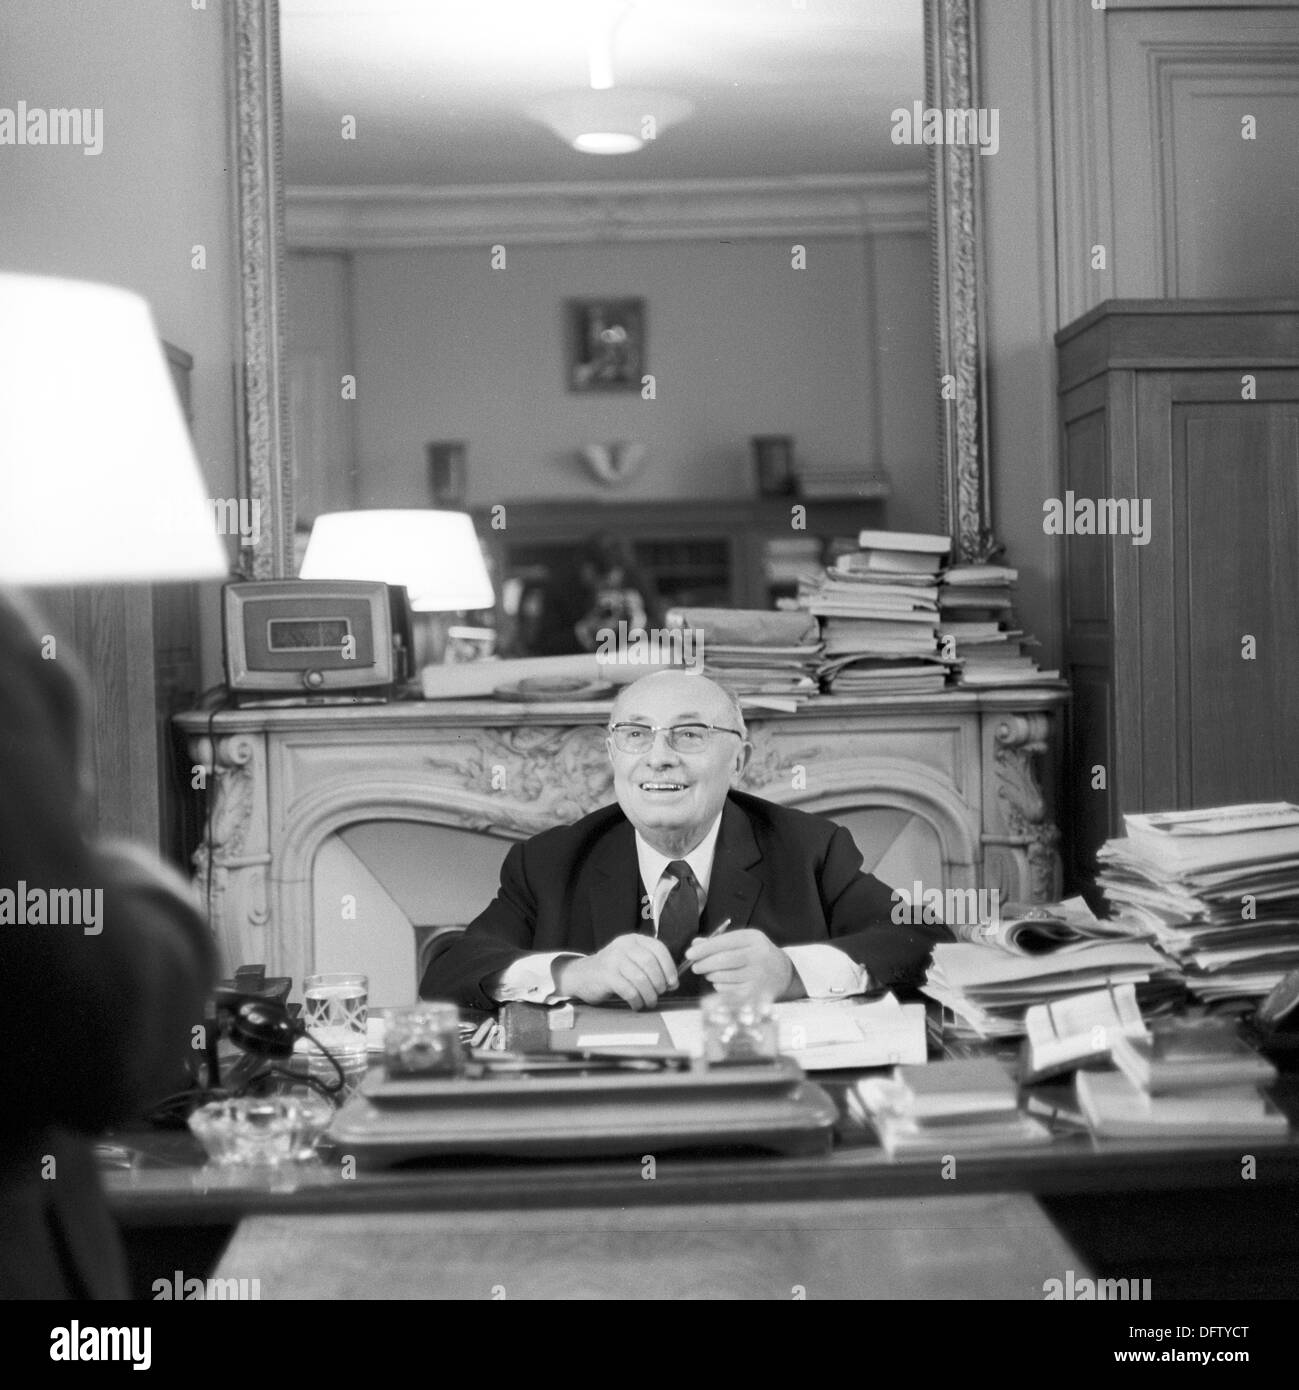 Communist politician Jacques Duclos is pictured in his office in Paris, France, in November 1970. Duclos reached 21,2 percent in the French presidential elections in 1969, the highest percentage a Communist candidate ever reached. Photo: Wilfried Glienke Stock Photo